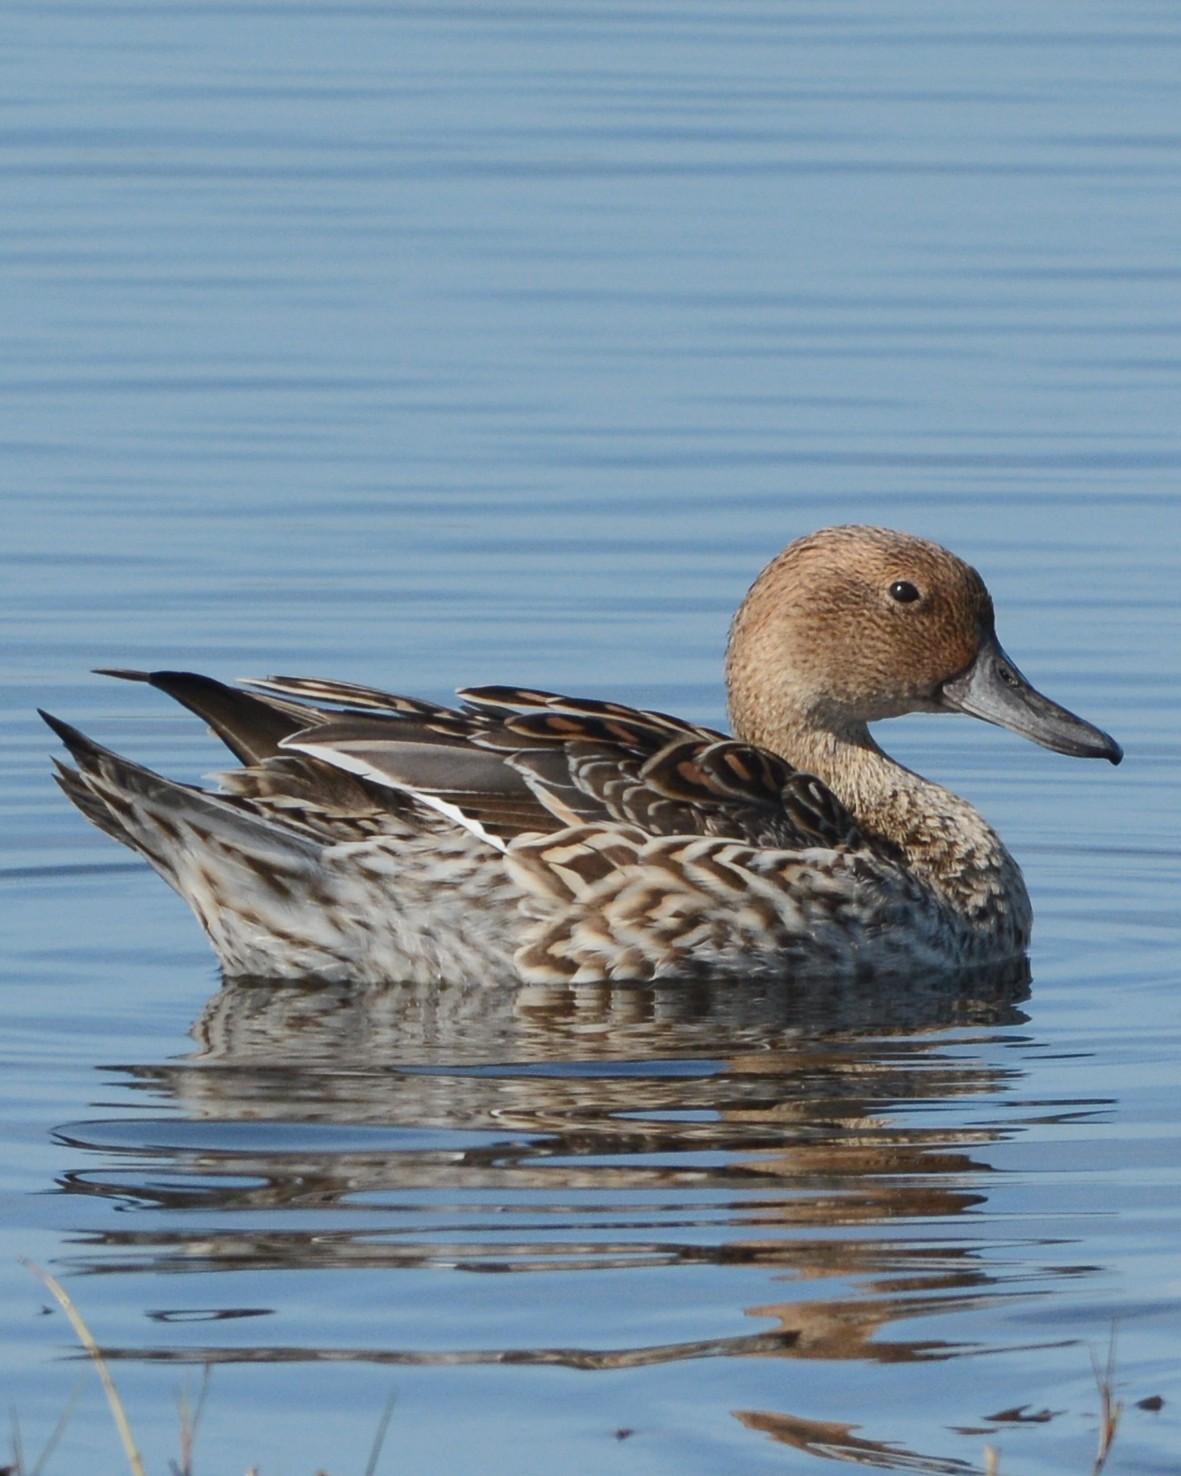 Northern Pintail Photo by David Hollie